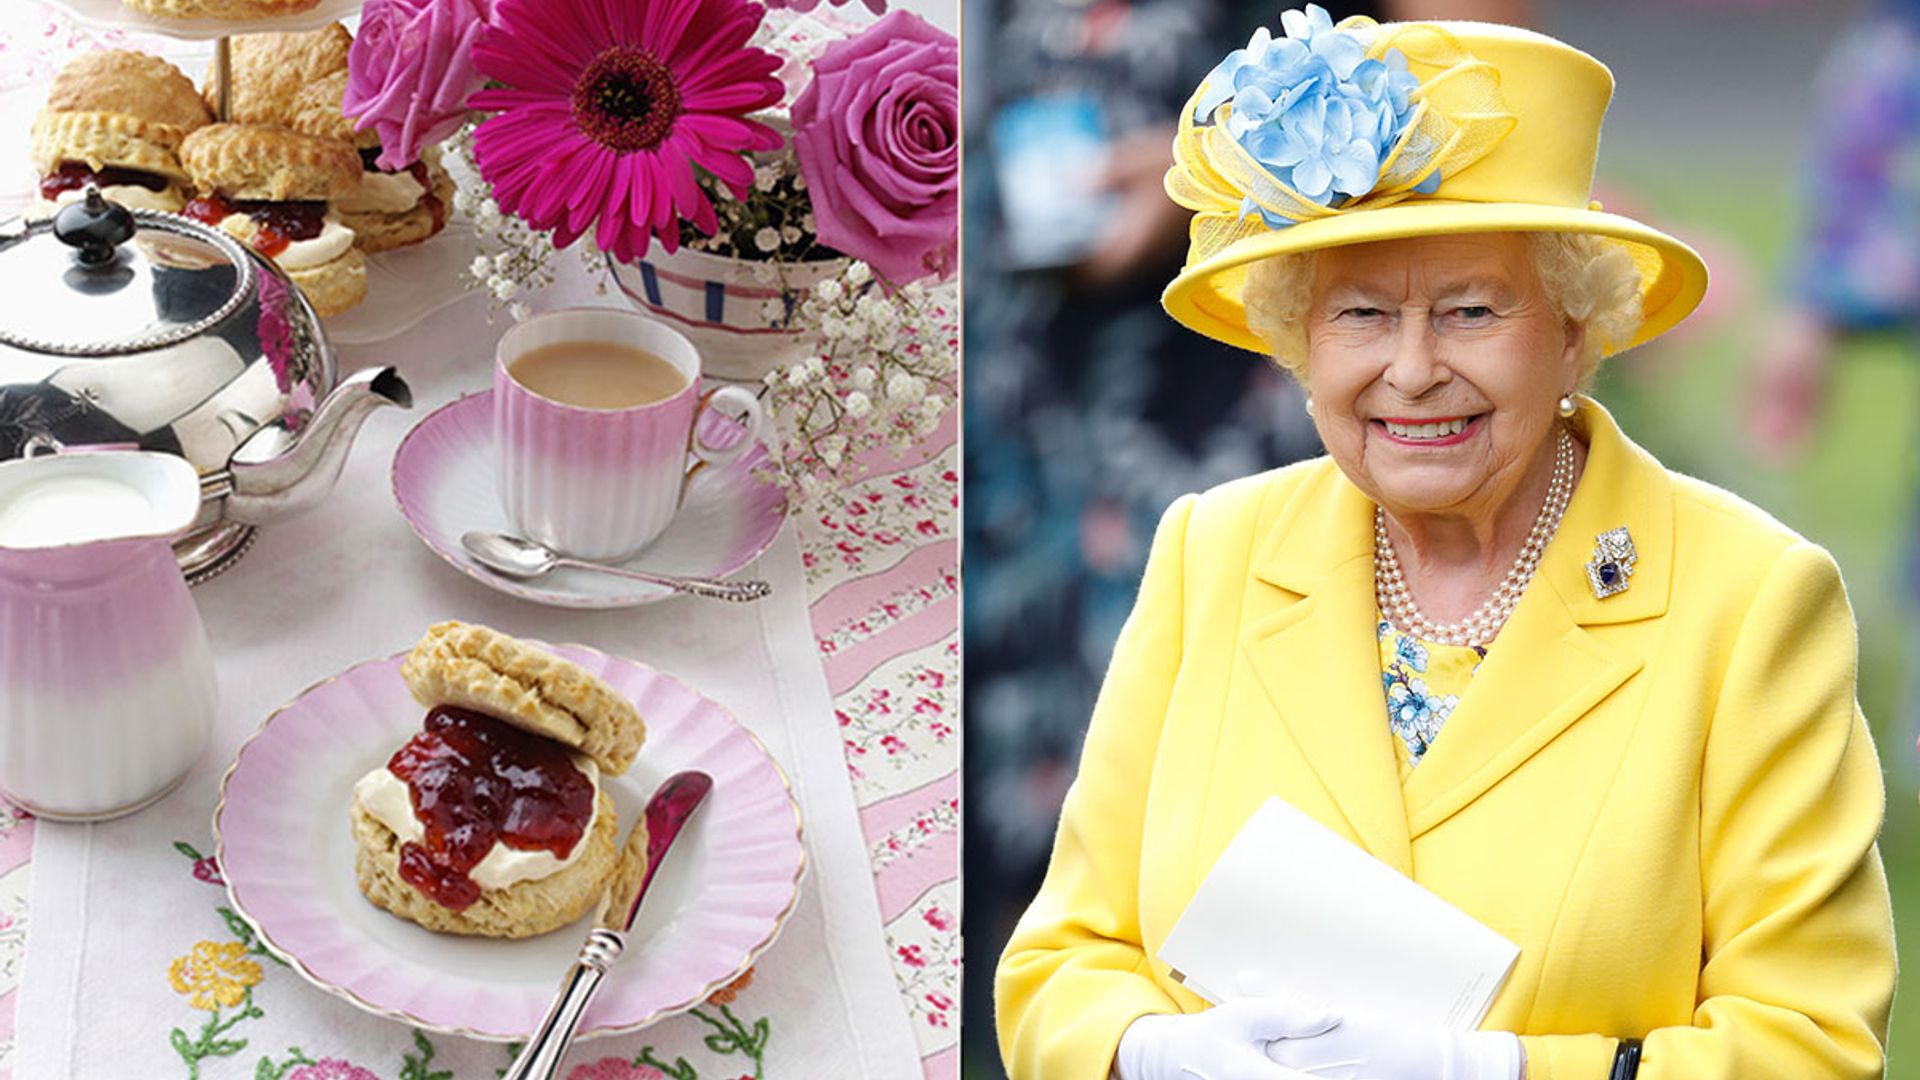 Jam or cream first on a scone? This is what the Queen does...